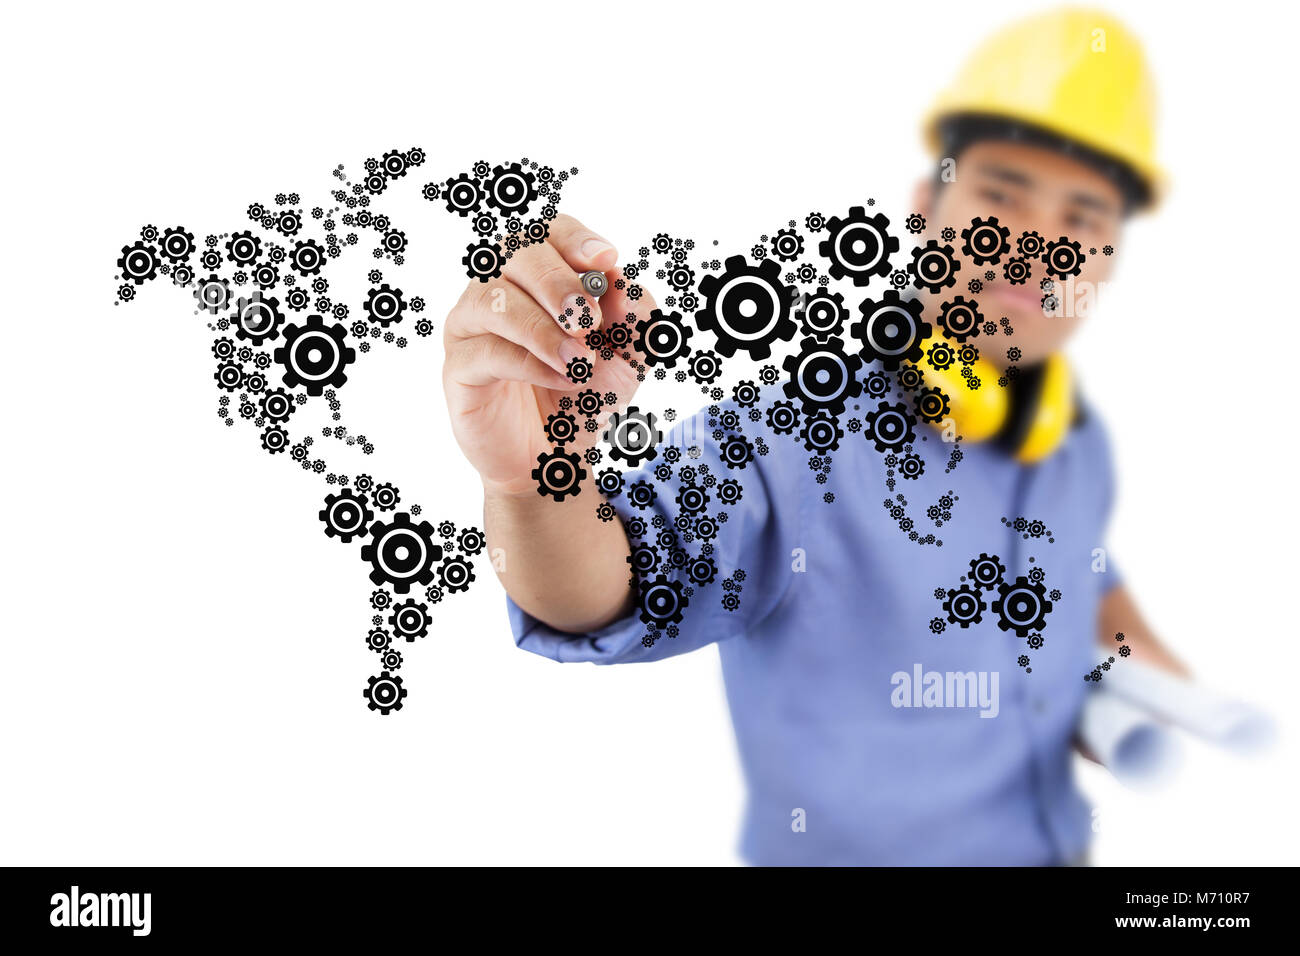 Engineer drawing gear driven industry. Stock Photo